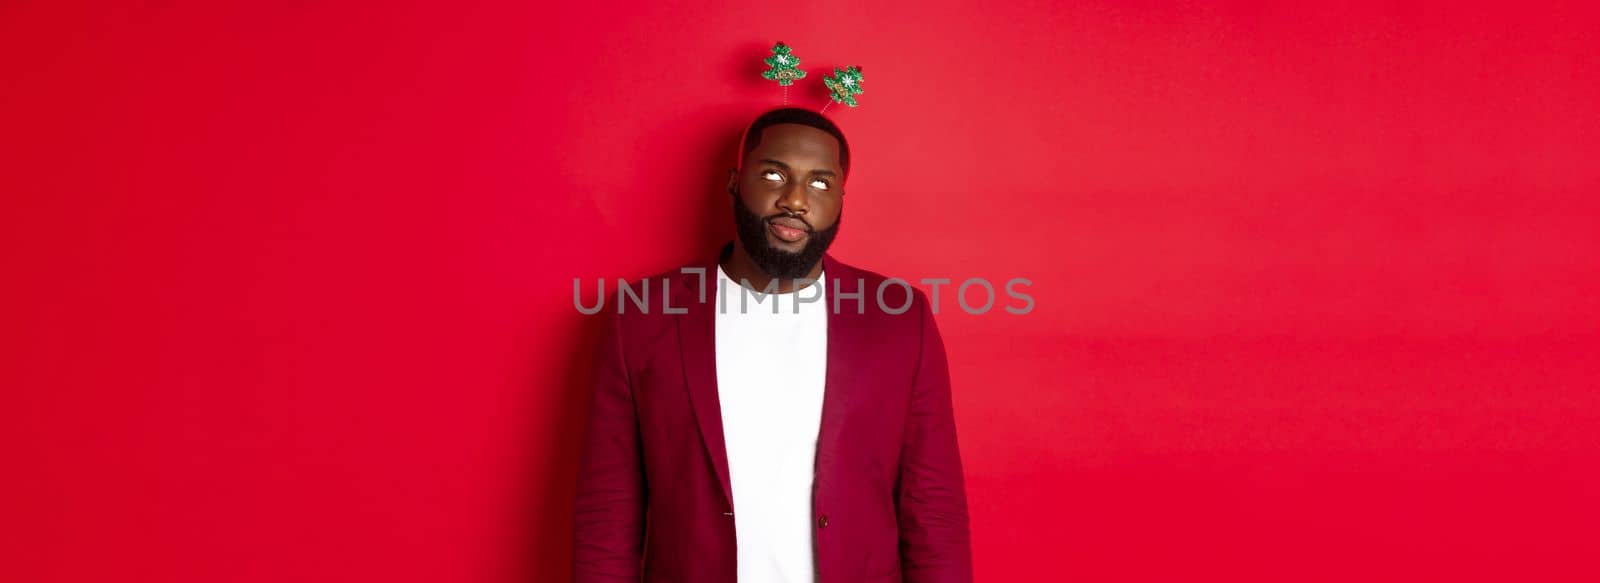 Merry Christmas. Annoyed african american man roll eyes, wearing silly headband on party, standing over red background.